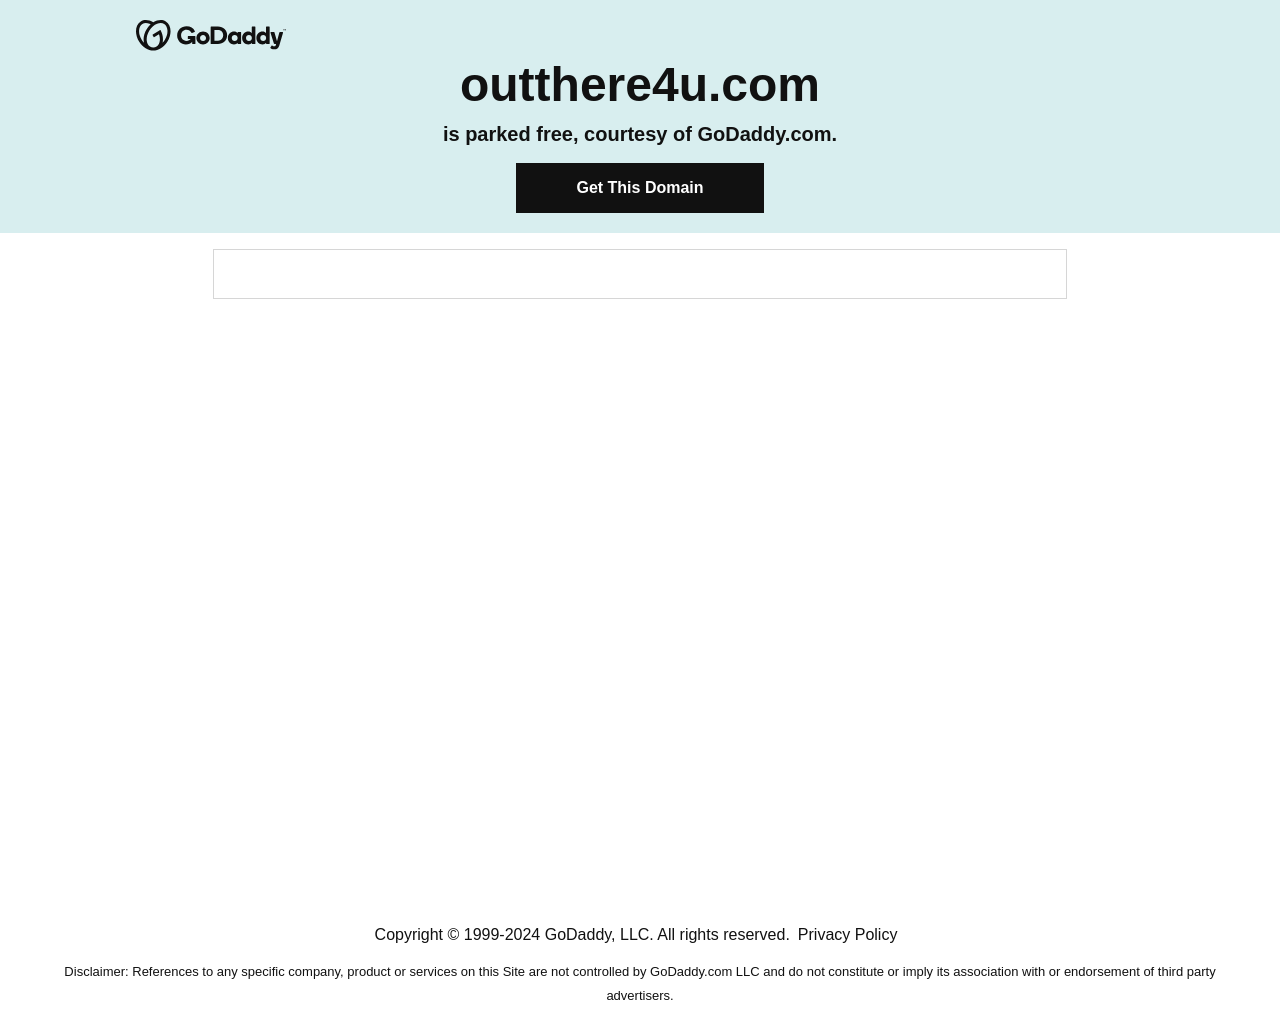 outthere4u.com